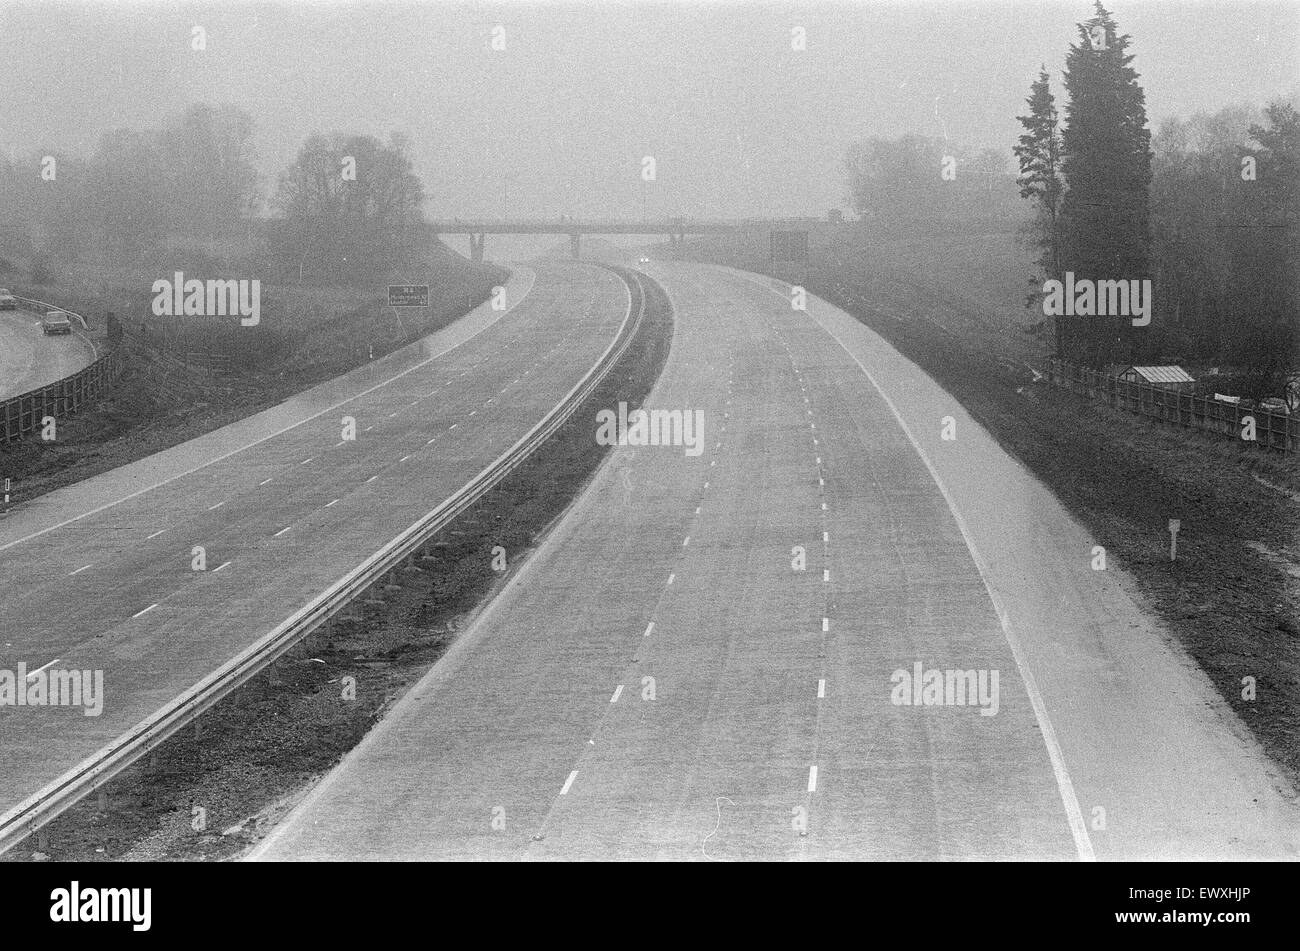 Opening of M4 Motorway 22nd December 1971. With the English section of the motorway completed. A 50 mile (80 km) stretch between Junctions 9 and 15  (Maidenhead and Swindon) and opened to traffic. Stock Photo